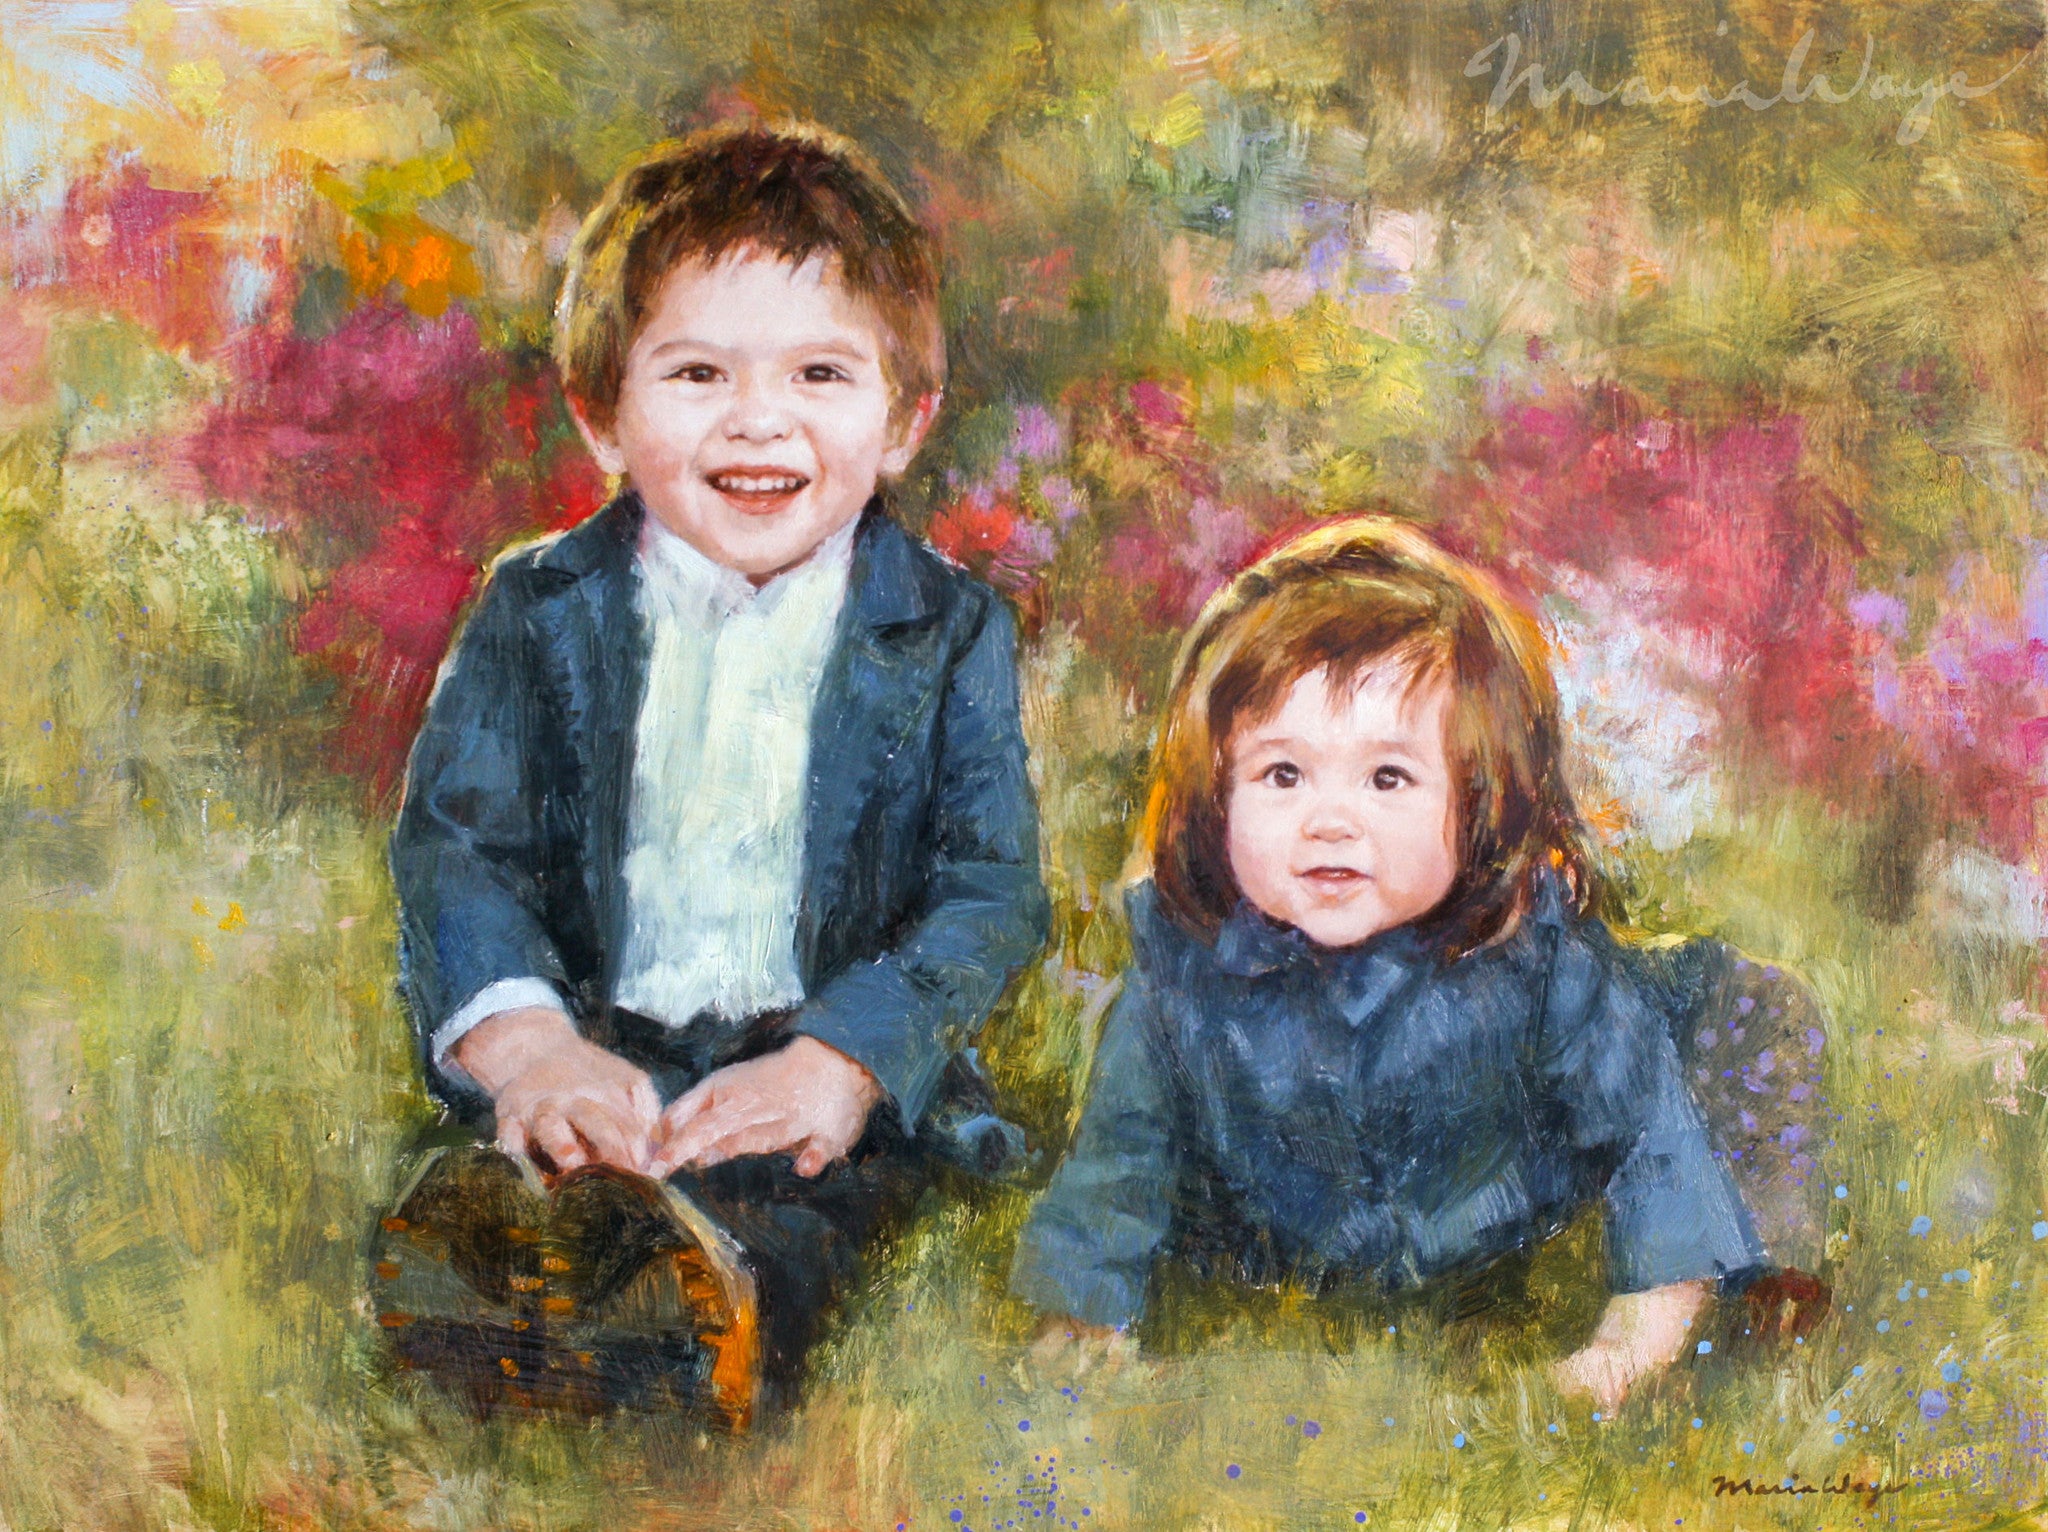 Underpainting in Oil and Acrylic - Jackson's Art Blog